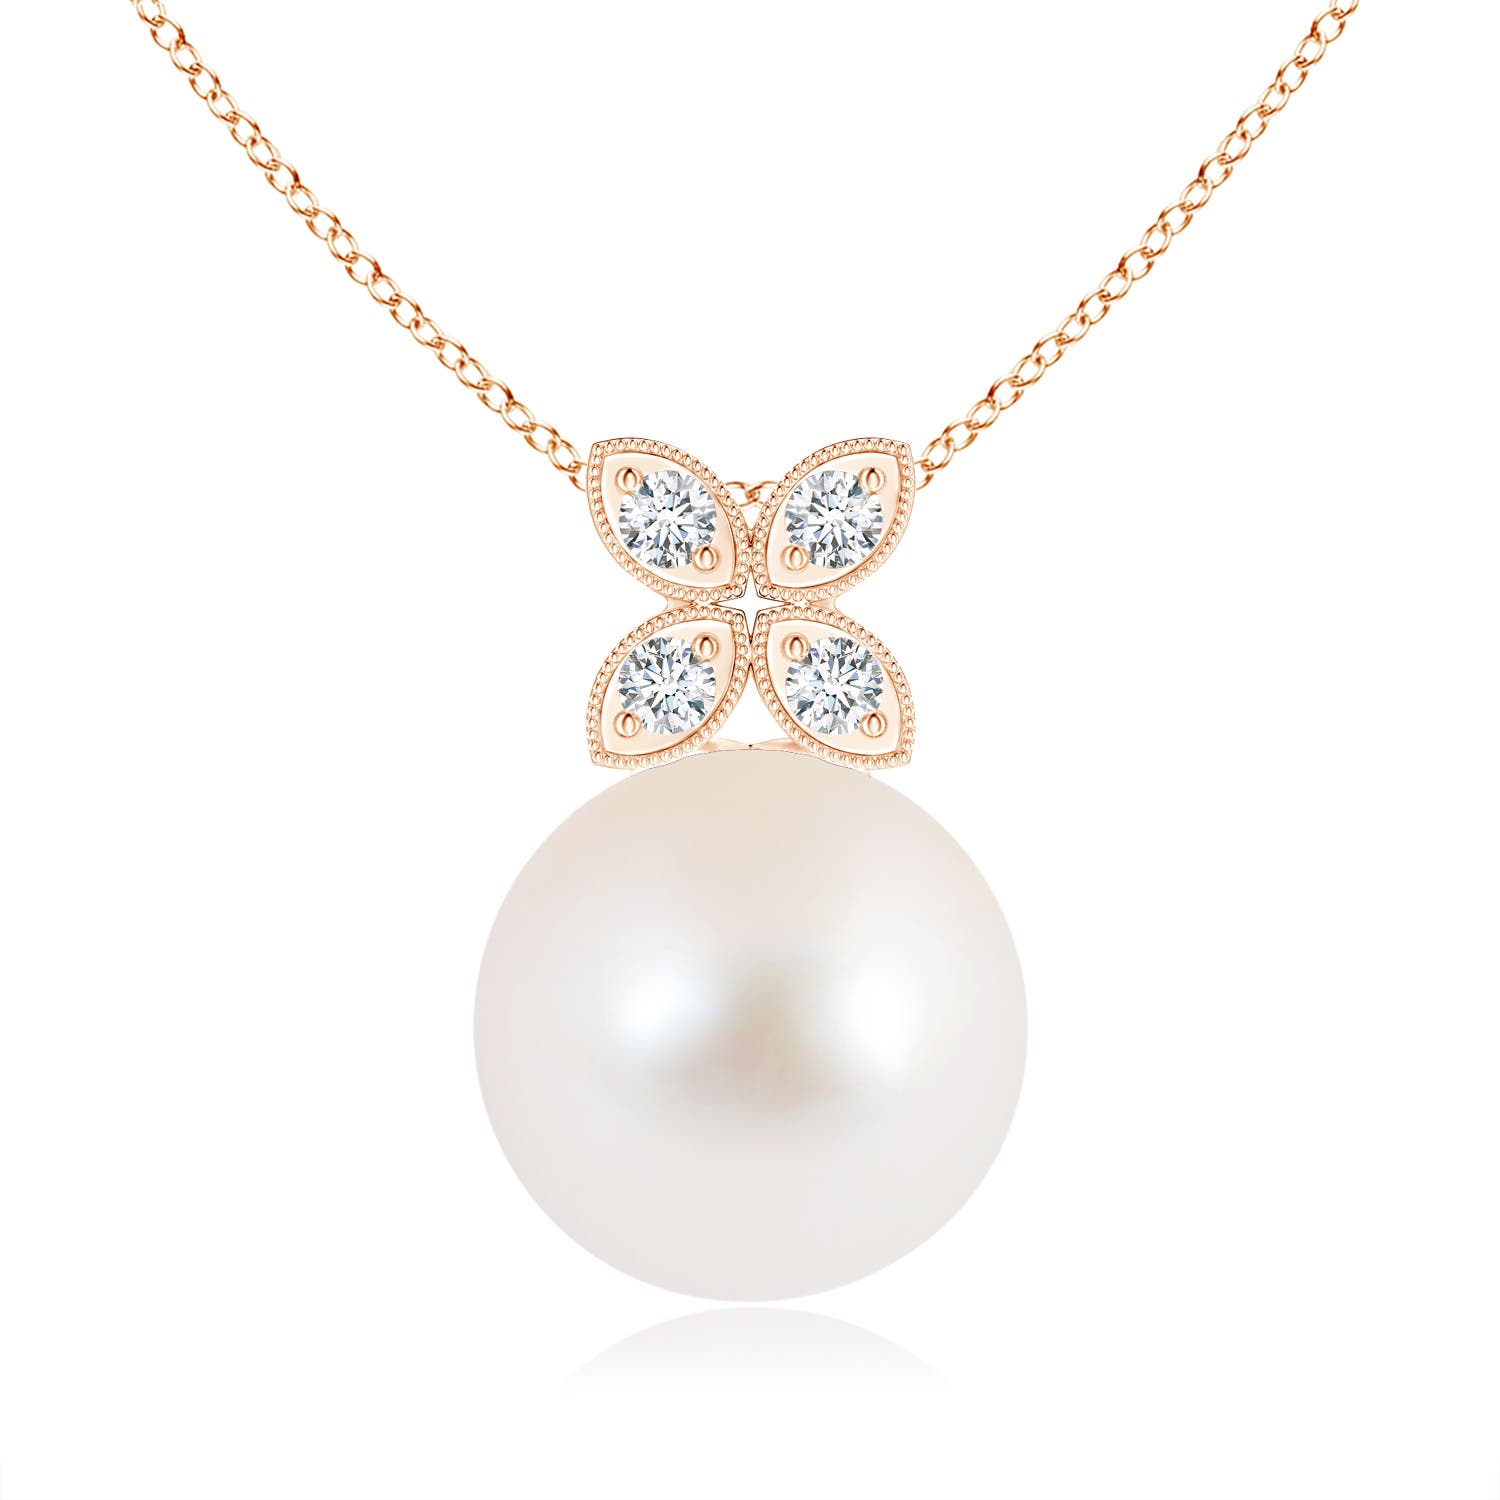 AAA - Freshwater Cultured Pearl / 7.3 CT / 14 KT Rose Gold